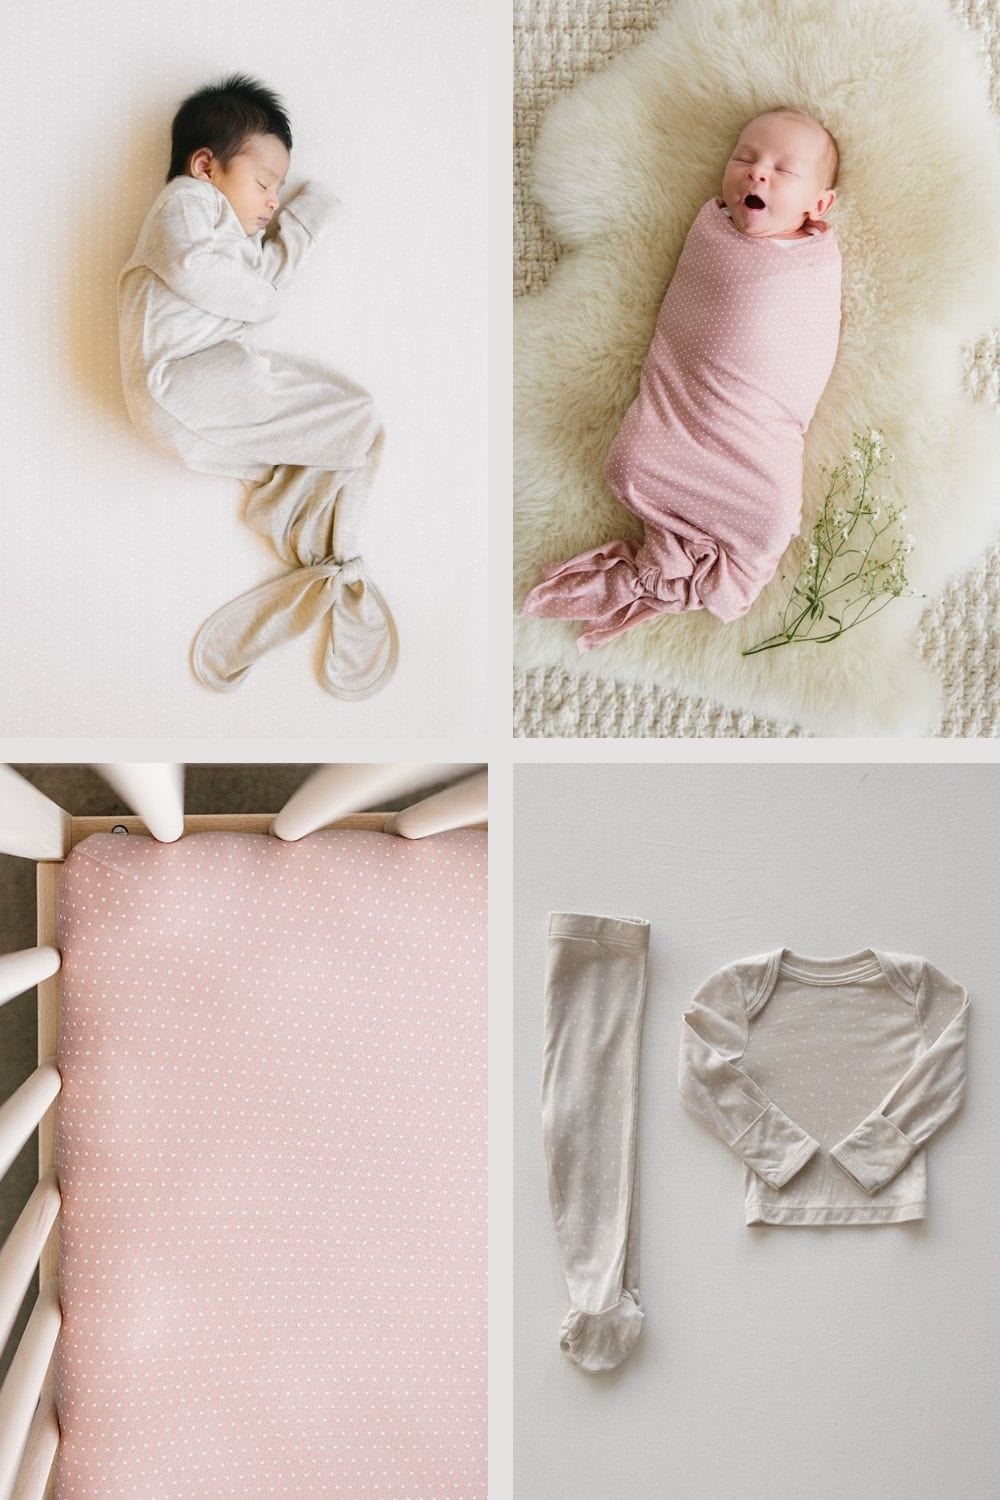 Solly Baby Products including a crib sheet, newborn pajamas, swaddle, and sleep gown.